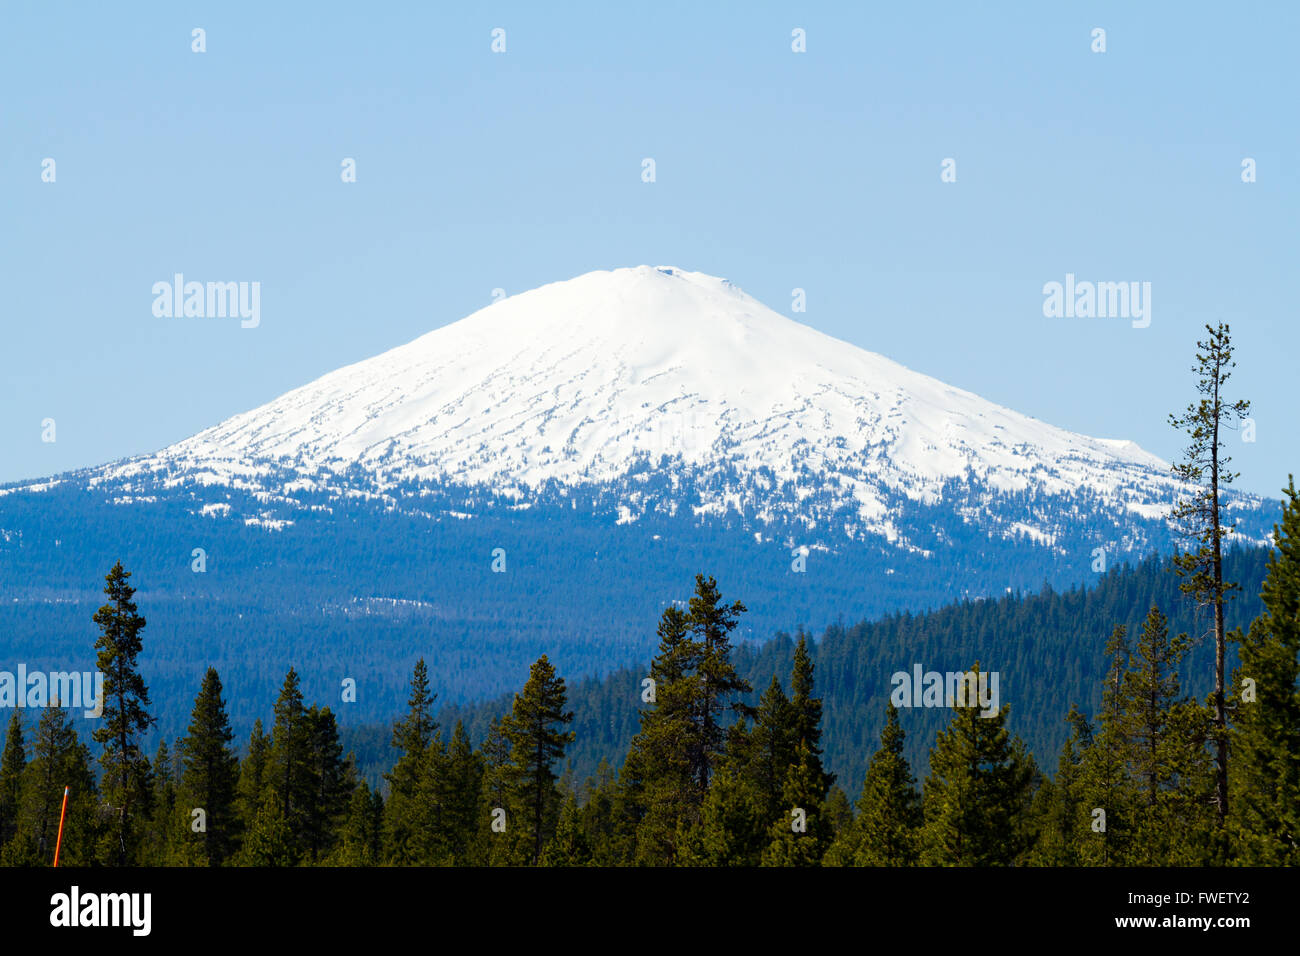 Mount Bachelor in Oregon is photographed from a distance to create this nature scenic landscape of the snow-capped mountain. Stock Photo